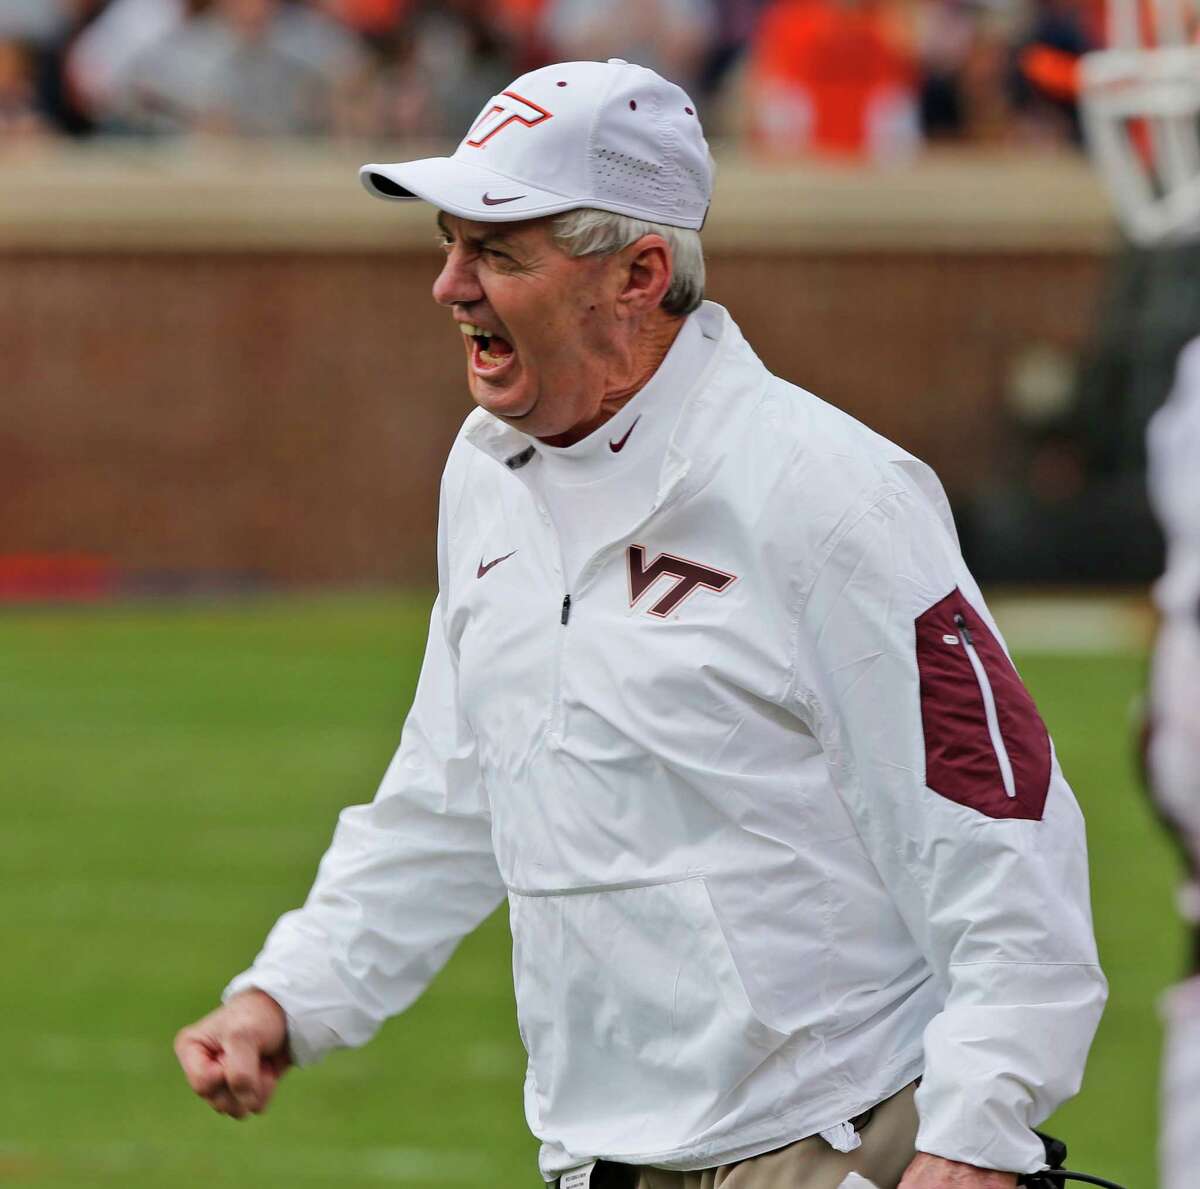 Virginia Tech head coach Frank Beamer directs his players during the second half of an NCAA college football game against Virginia in Charlottesville, Va., Saturday, Nov. 28, 2015. Tech won the game 23-20. (AP Photo/Steve Helber)